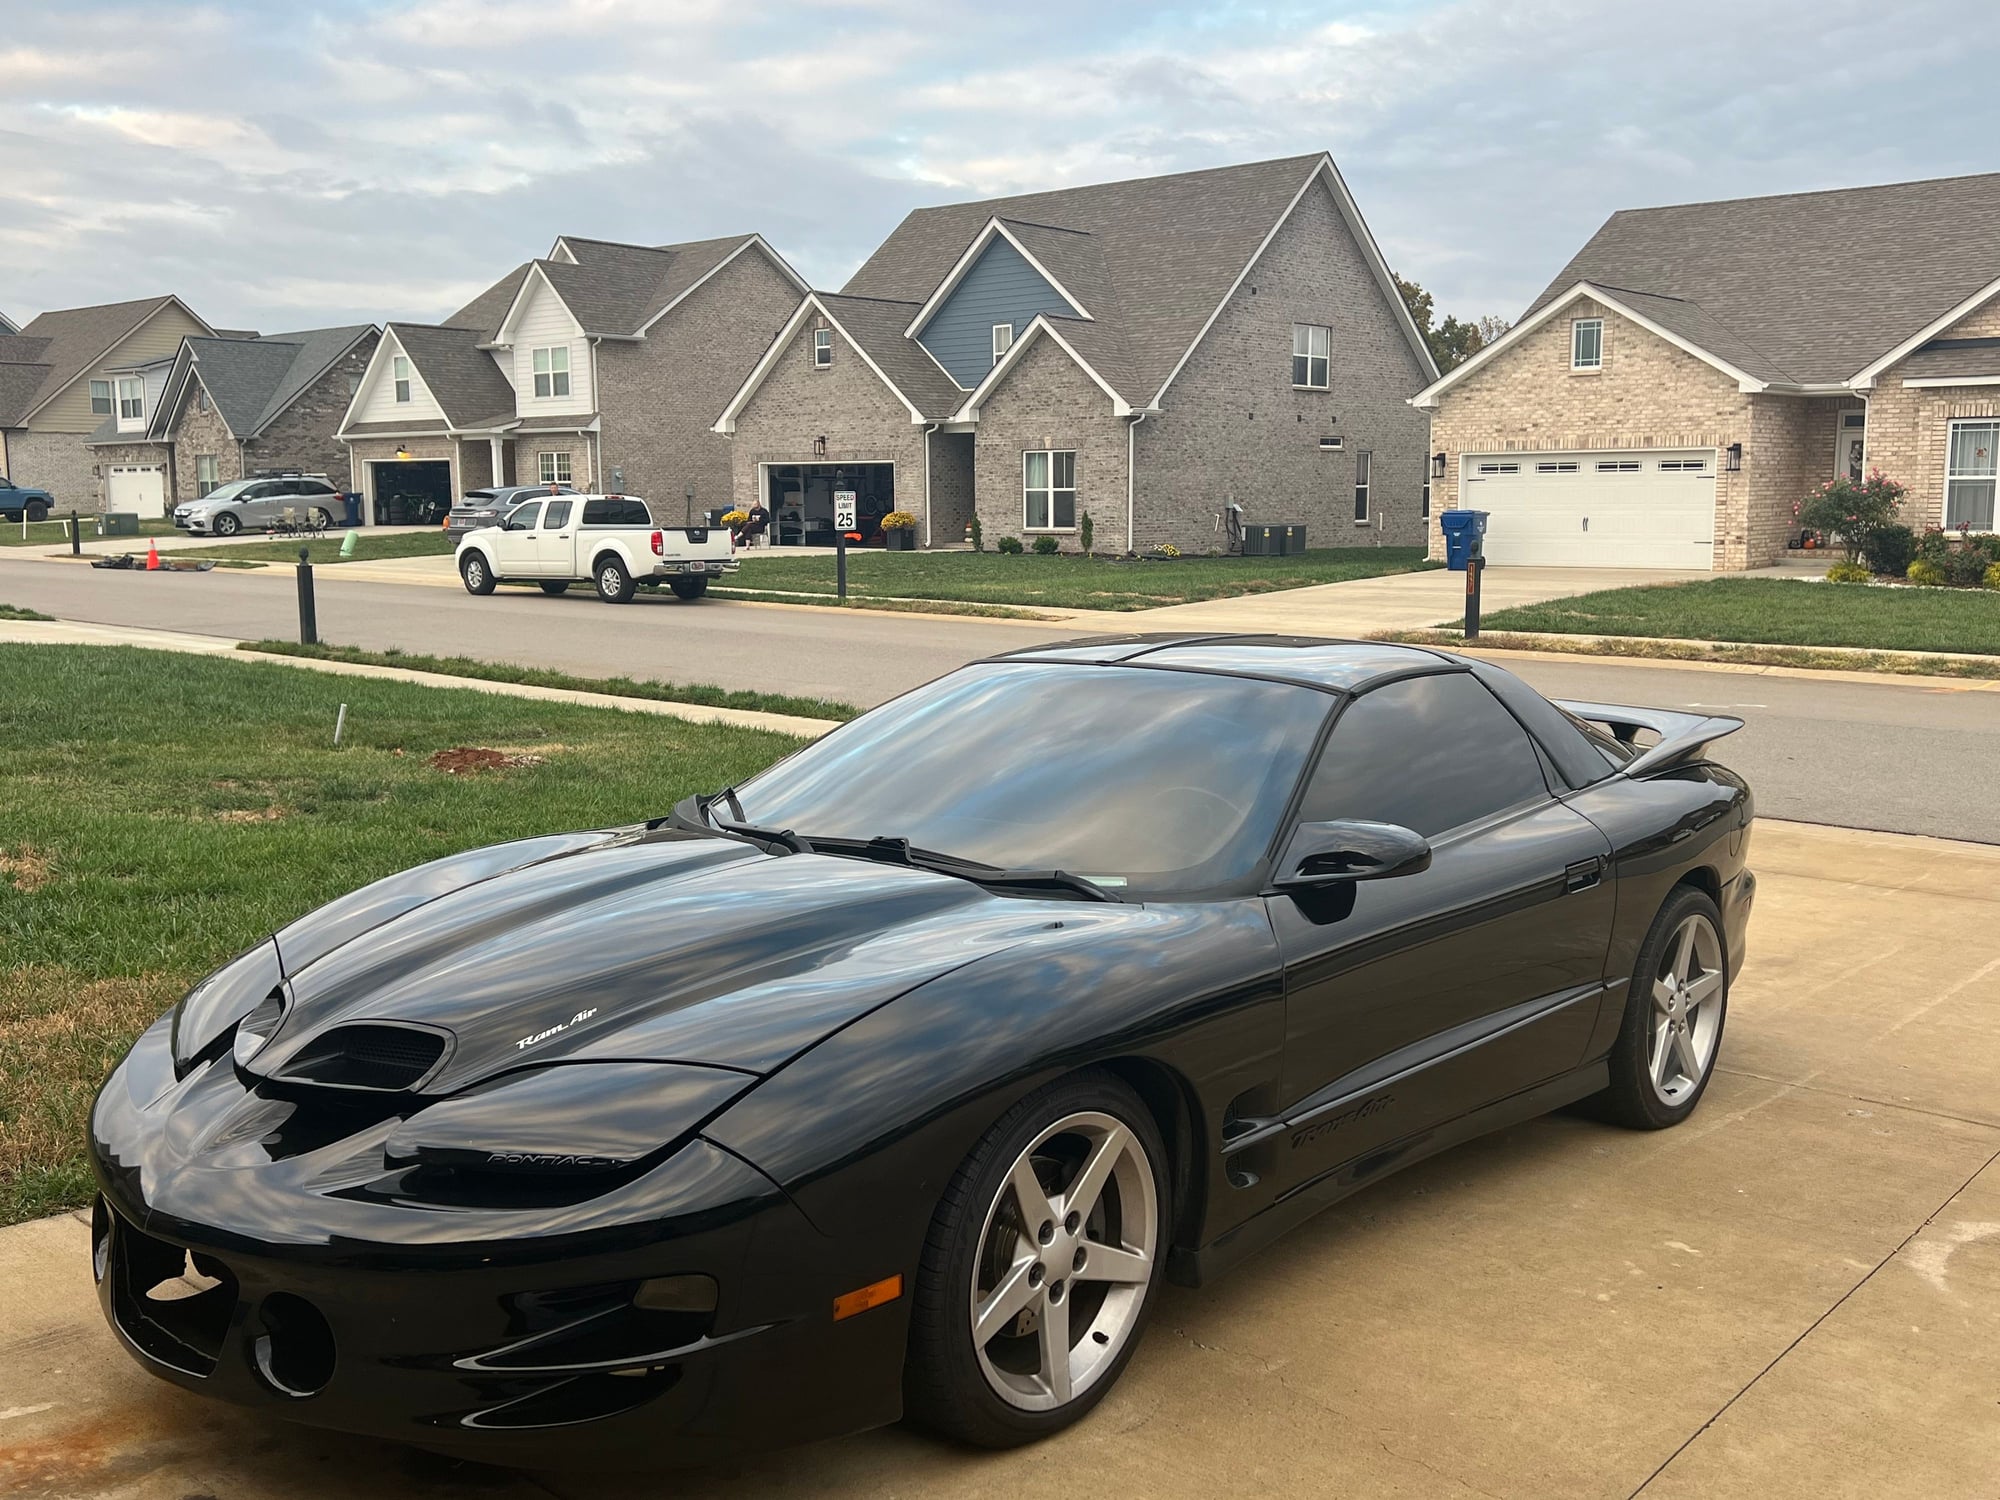 2002 Pontiac Firebird - 02 WS6 M6 Single Turbo - Used - VIN Will provide - 180,000 Miles - 2WD - Manual - Coupe - Black - Clarksville, TN 37043, United States